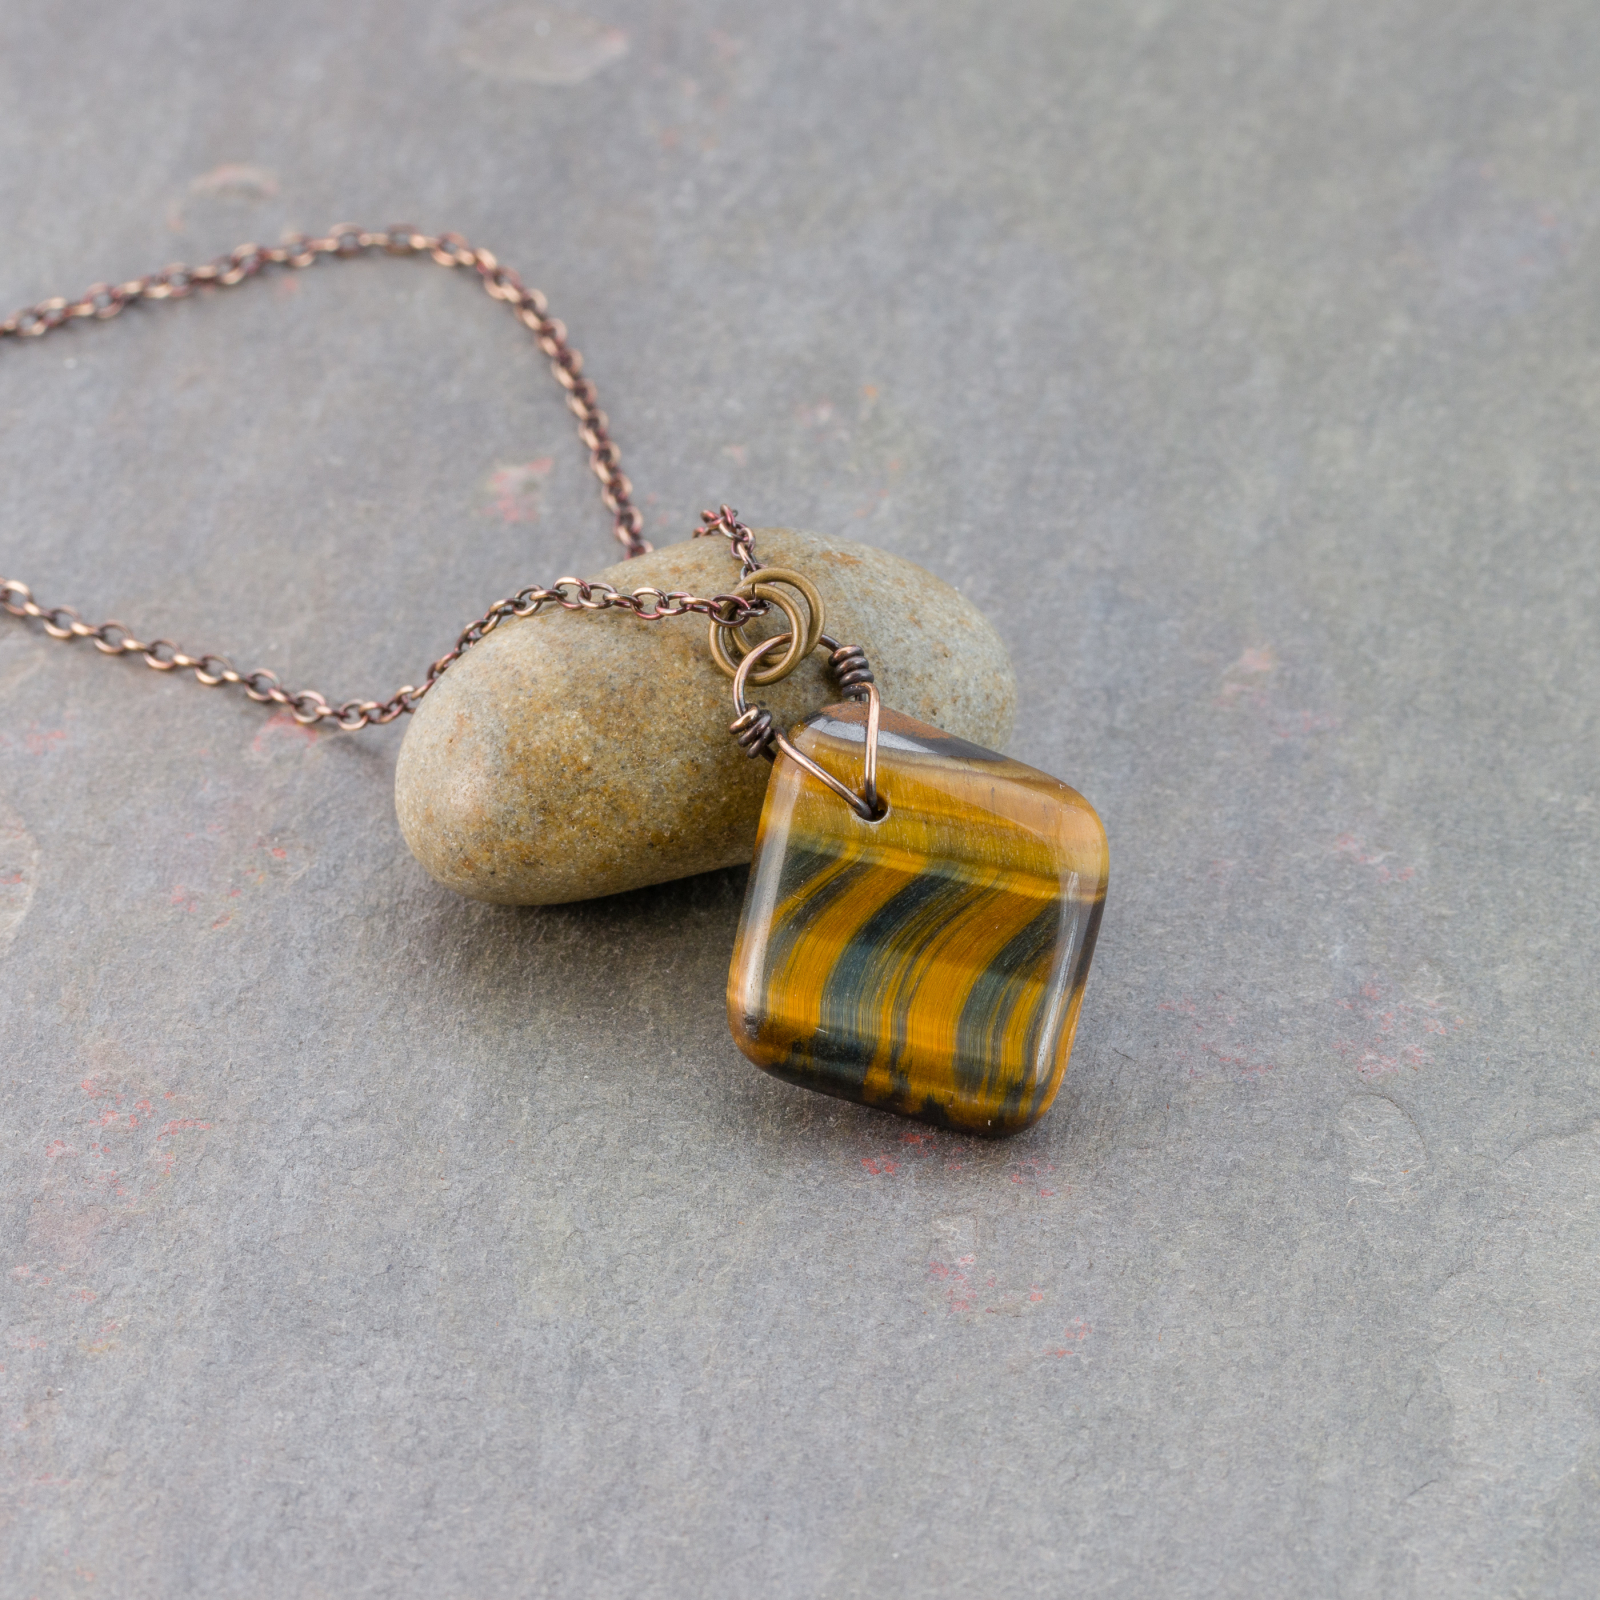 Tiger S Eye Pendant In Bronze Mixed Brown And Blue Tiger Eye Tumbled Stone 20 Inch Necklace Pebbles At My Feet,Kimchi Recipe Kimchi Ingredients List